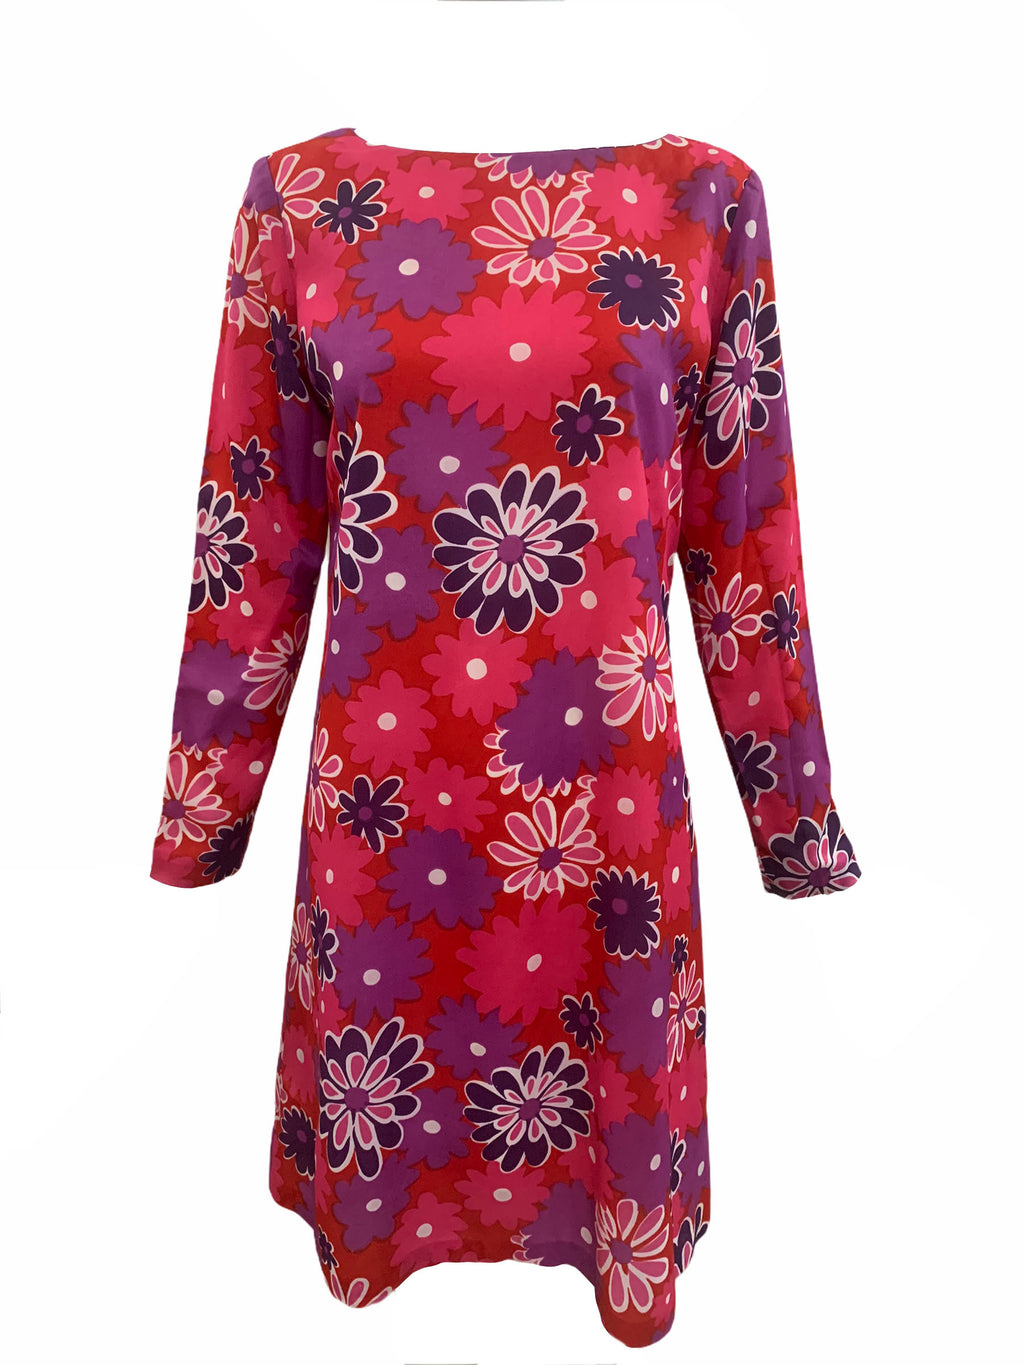 Jax 60s Red, Pink and Purple Floral Shift dress FRONT 1 of 4